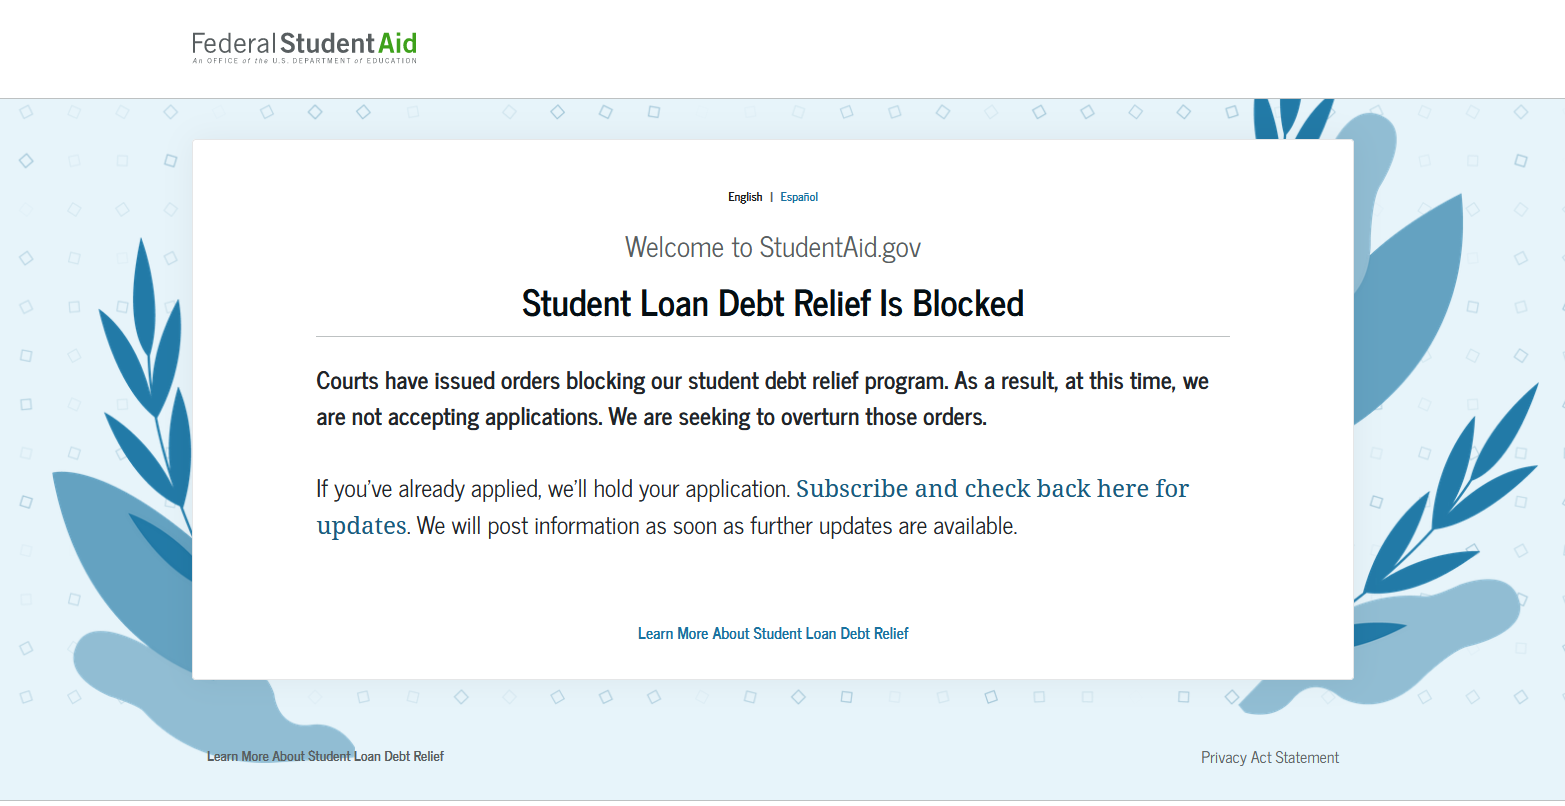 Loan Debt Relied Application Not Available